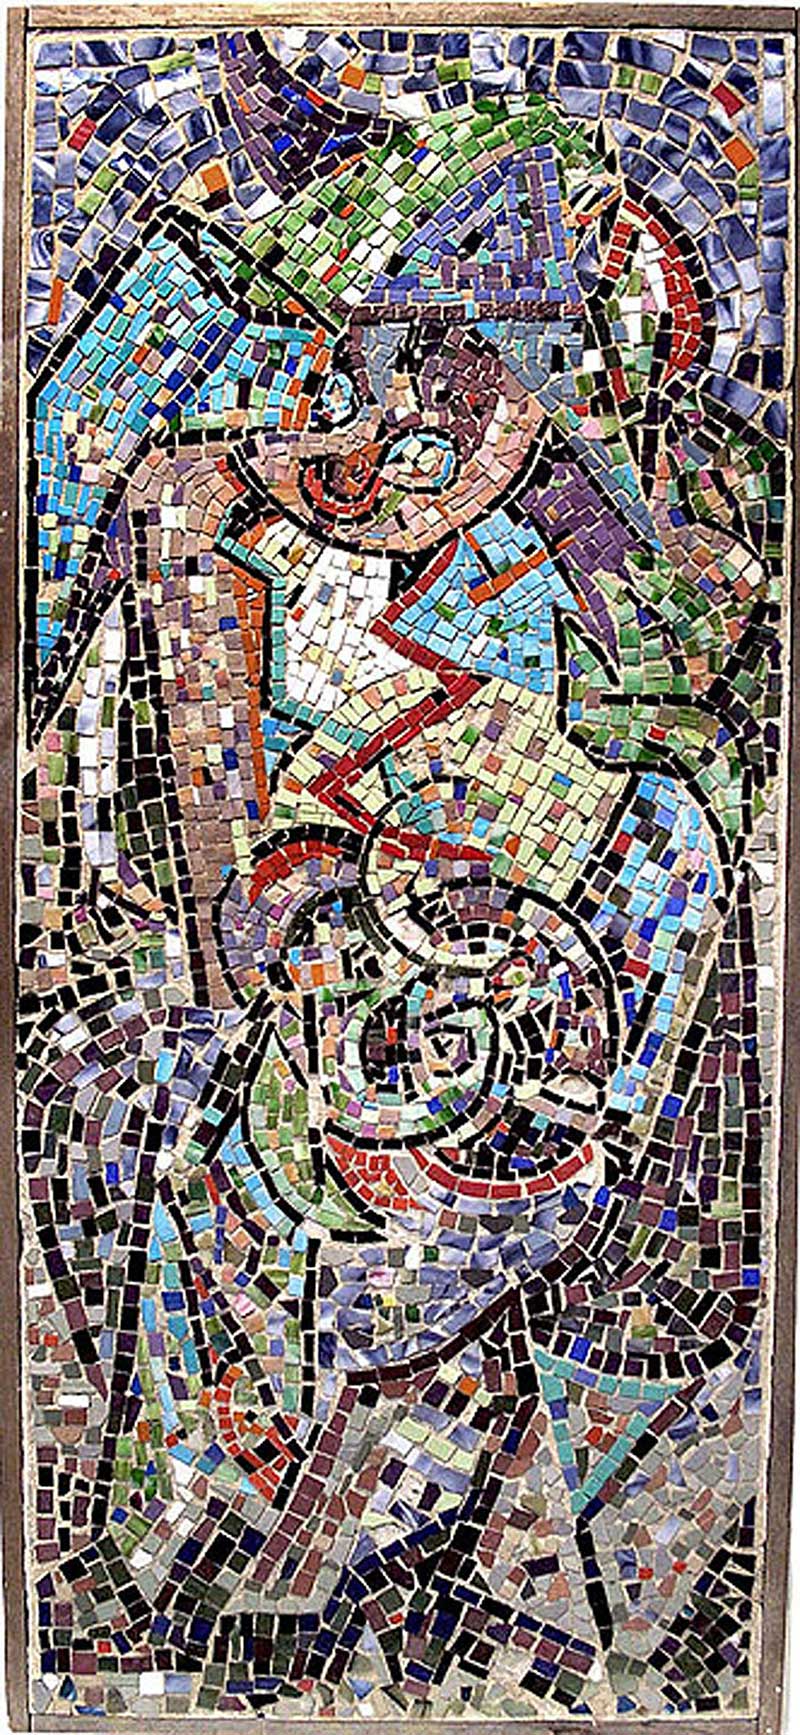 Jackson Pollock, Untitled, ca. 1938-41. Mosaic tesserae in cement backed with braced wood frame, 54 x 24 in. The Pollock-Krasner Foundation, courtesy of Washburn Gallery, New York